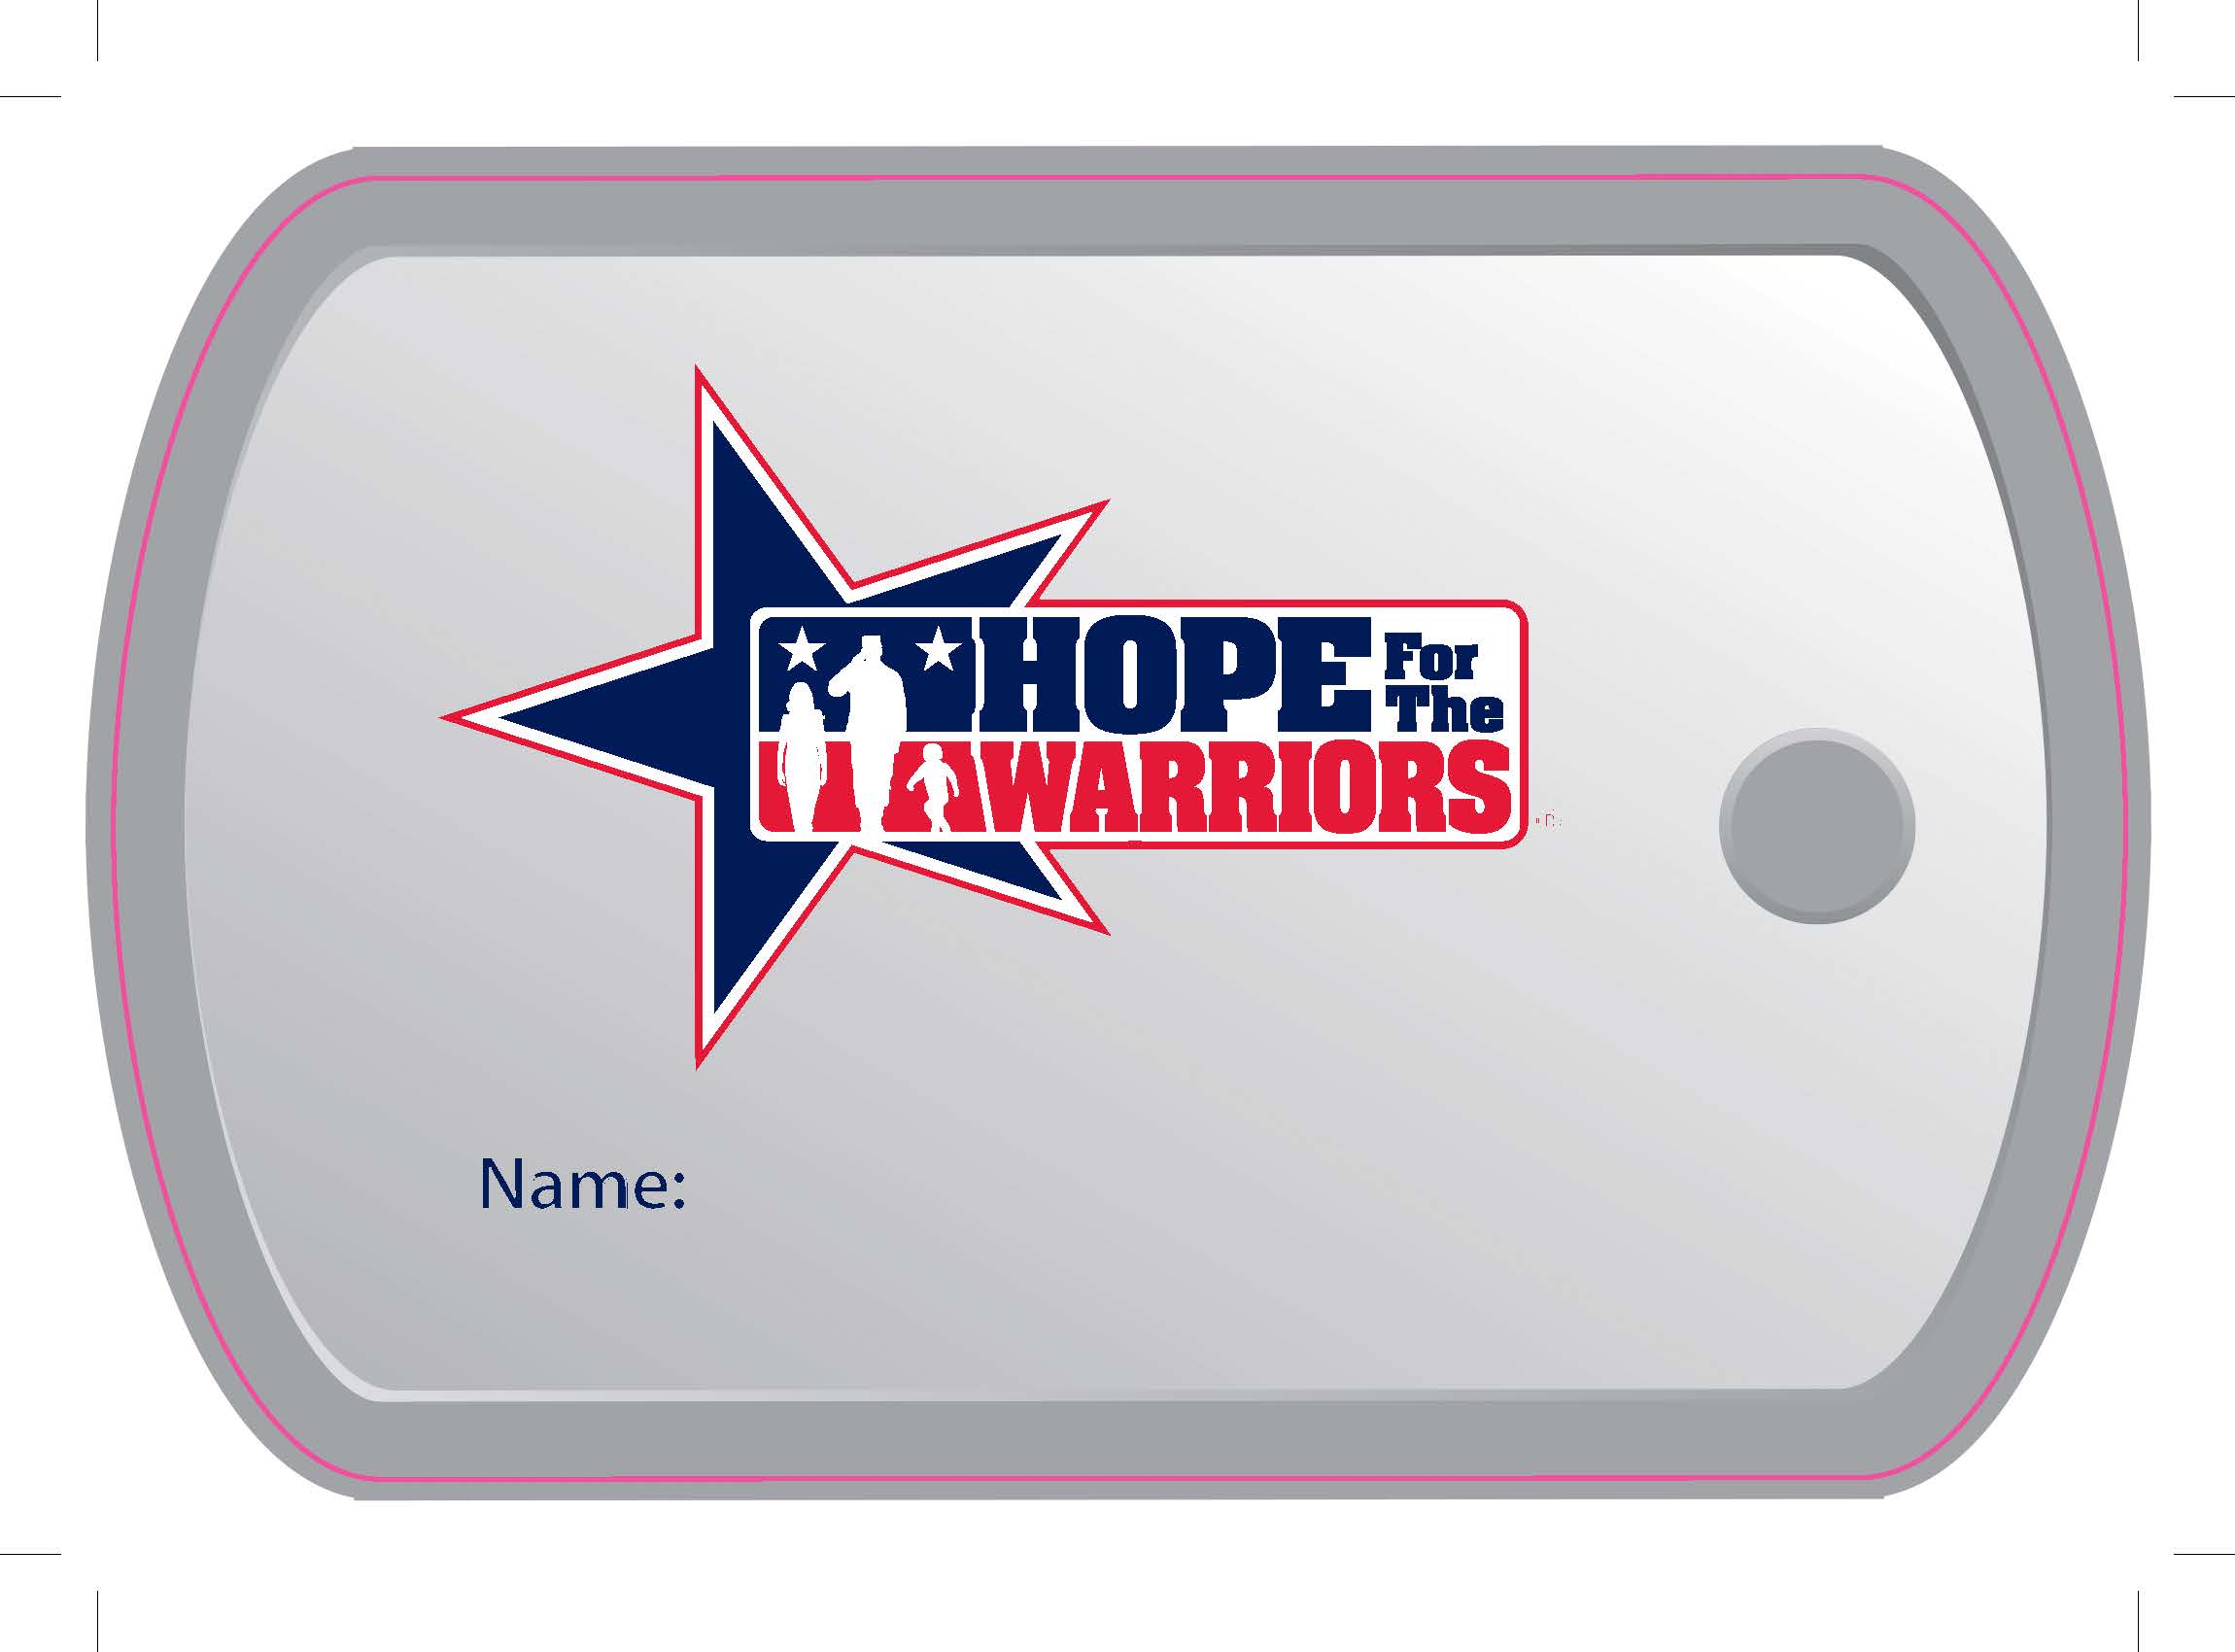 Show your support with a $1 "Dog Tag"